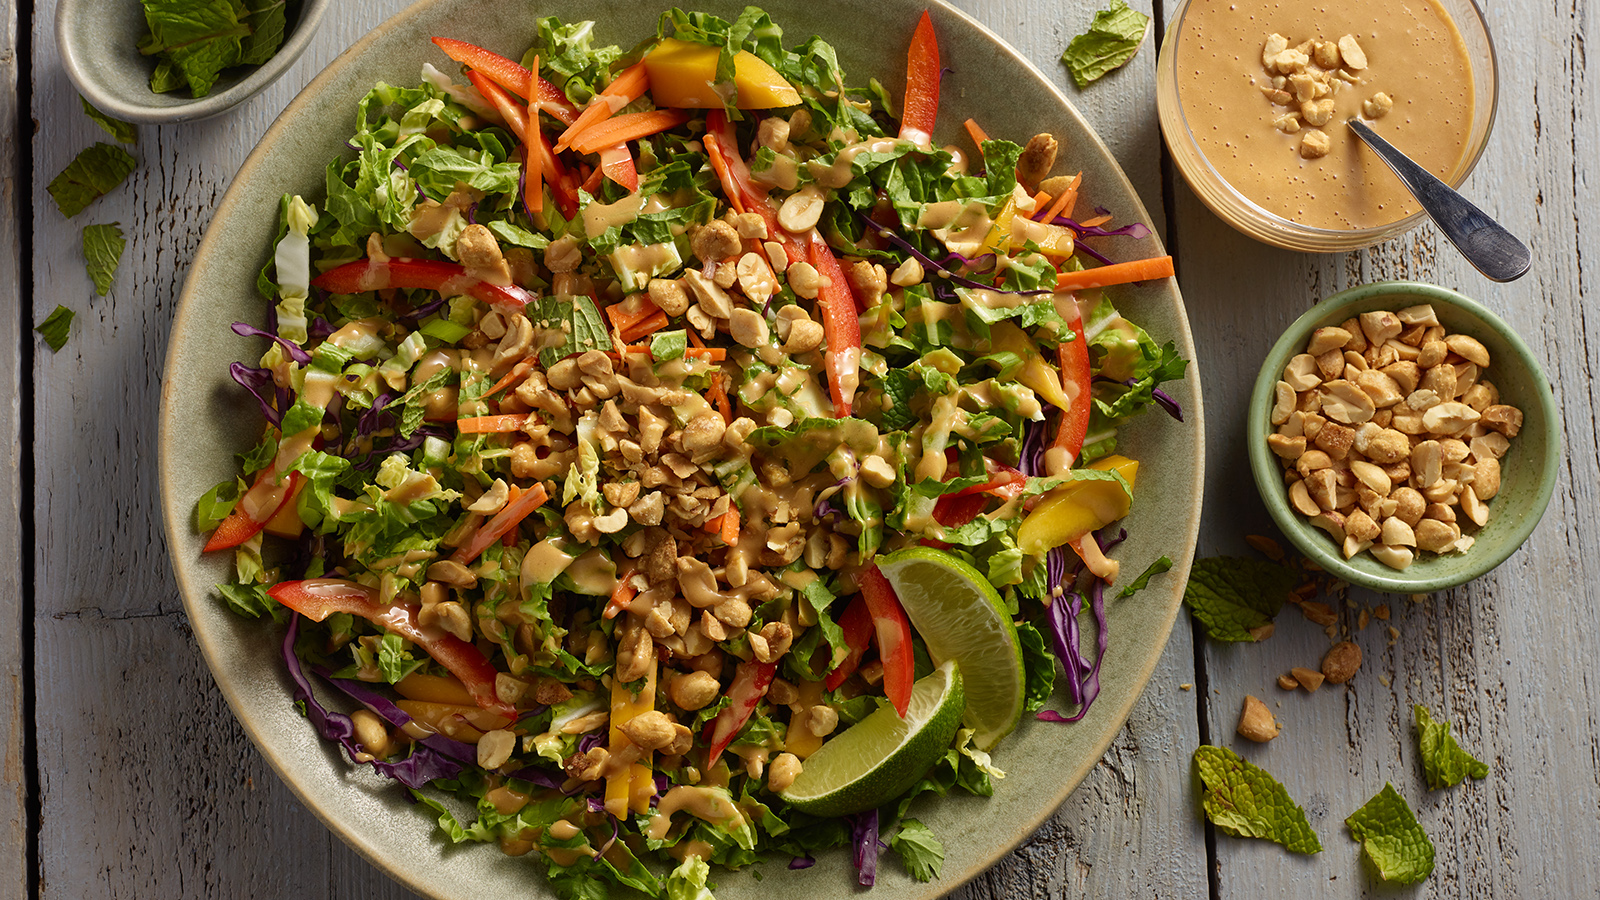 planters asian chopped salad with peanut dressing